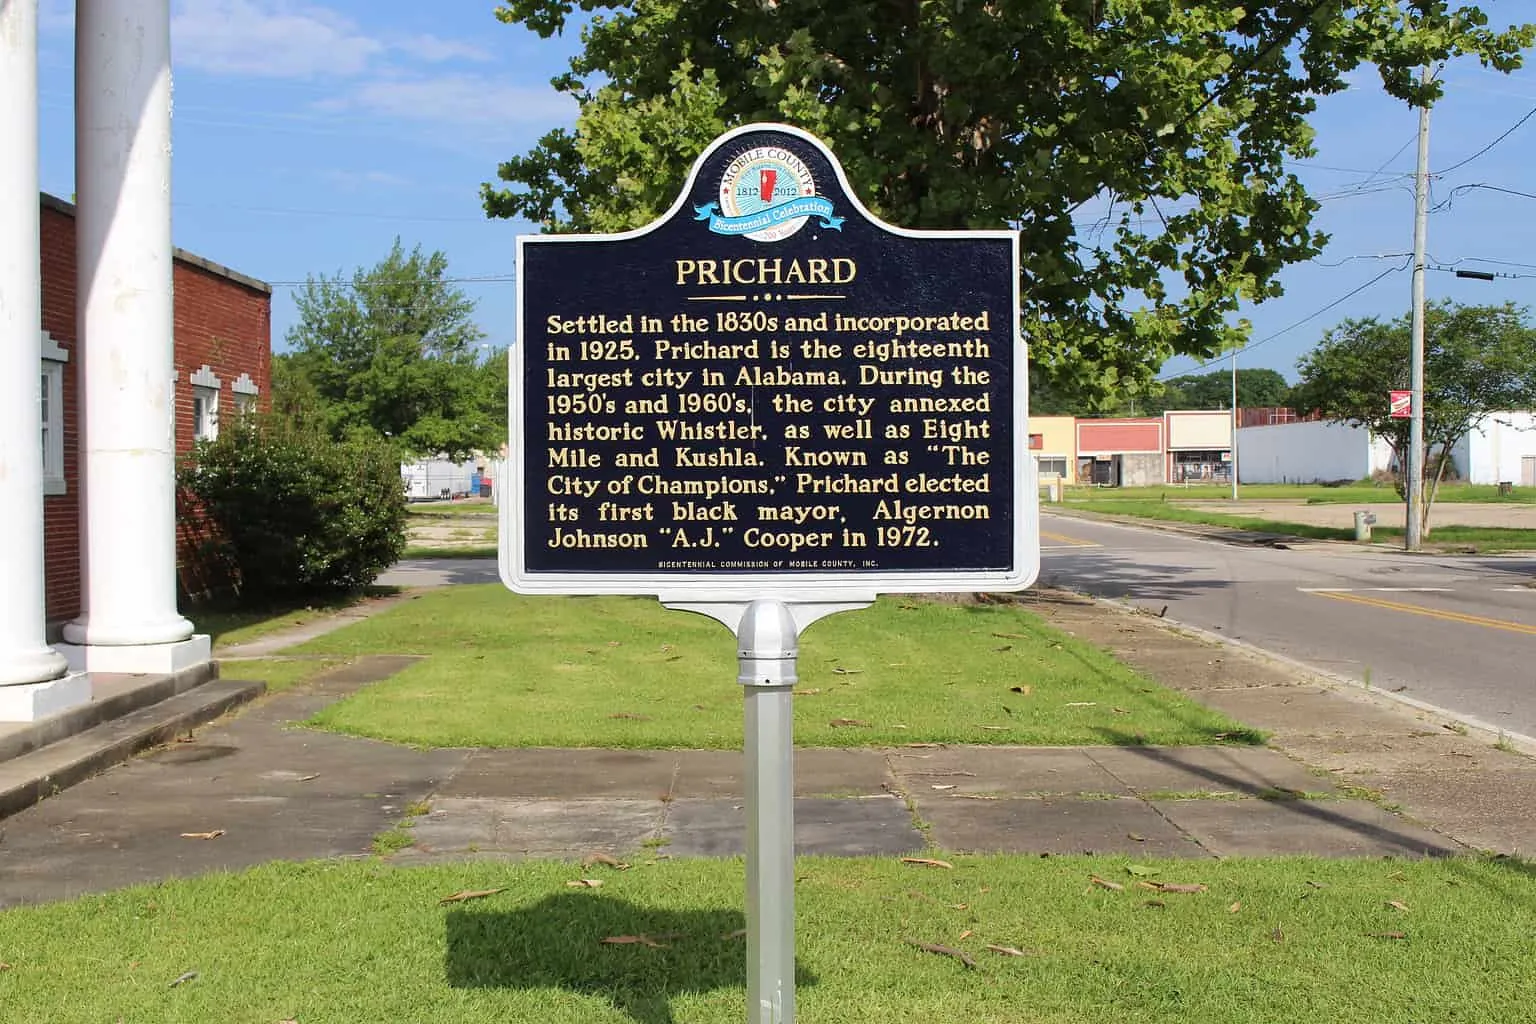 Prichard considered the poorest town in Alabama